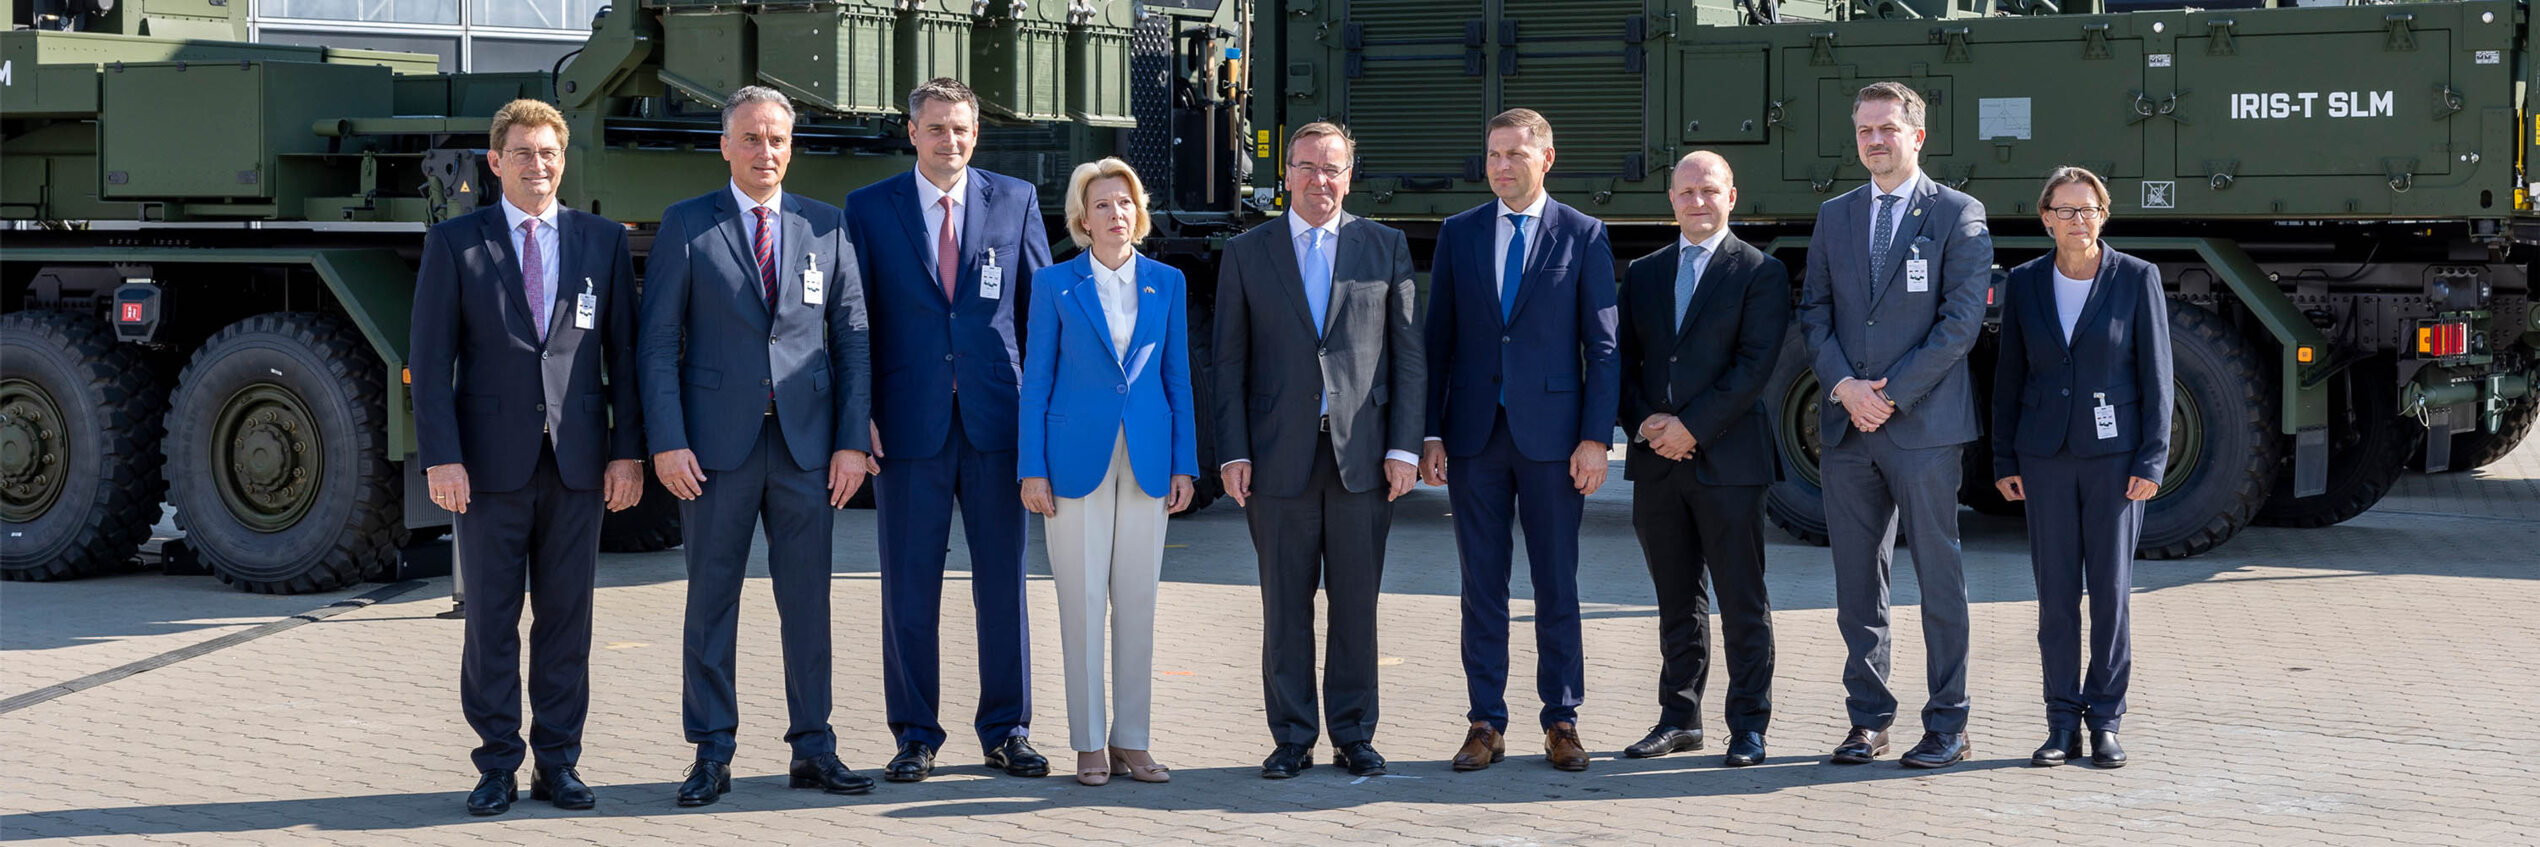 Ministers of Defence from Estonia, Latvia and Germany at Diehl Defence